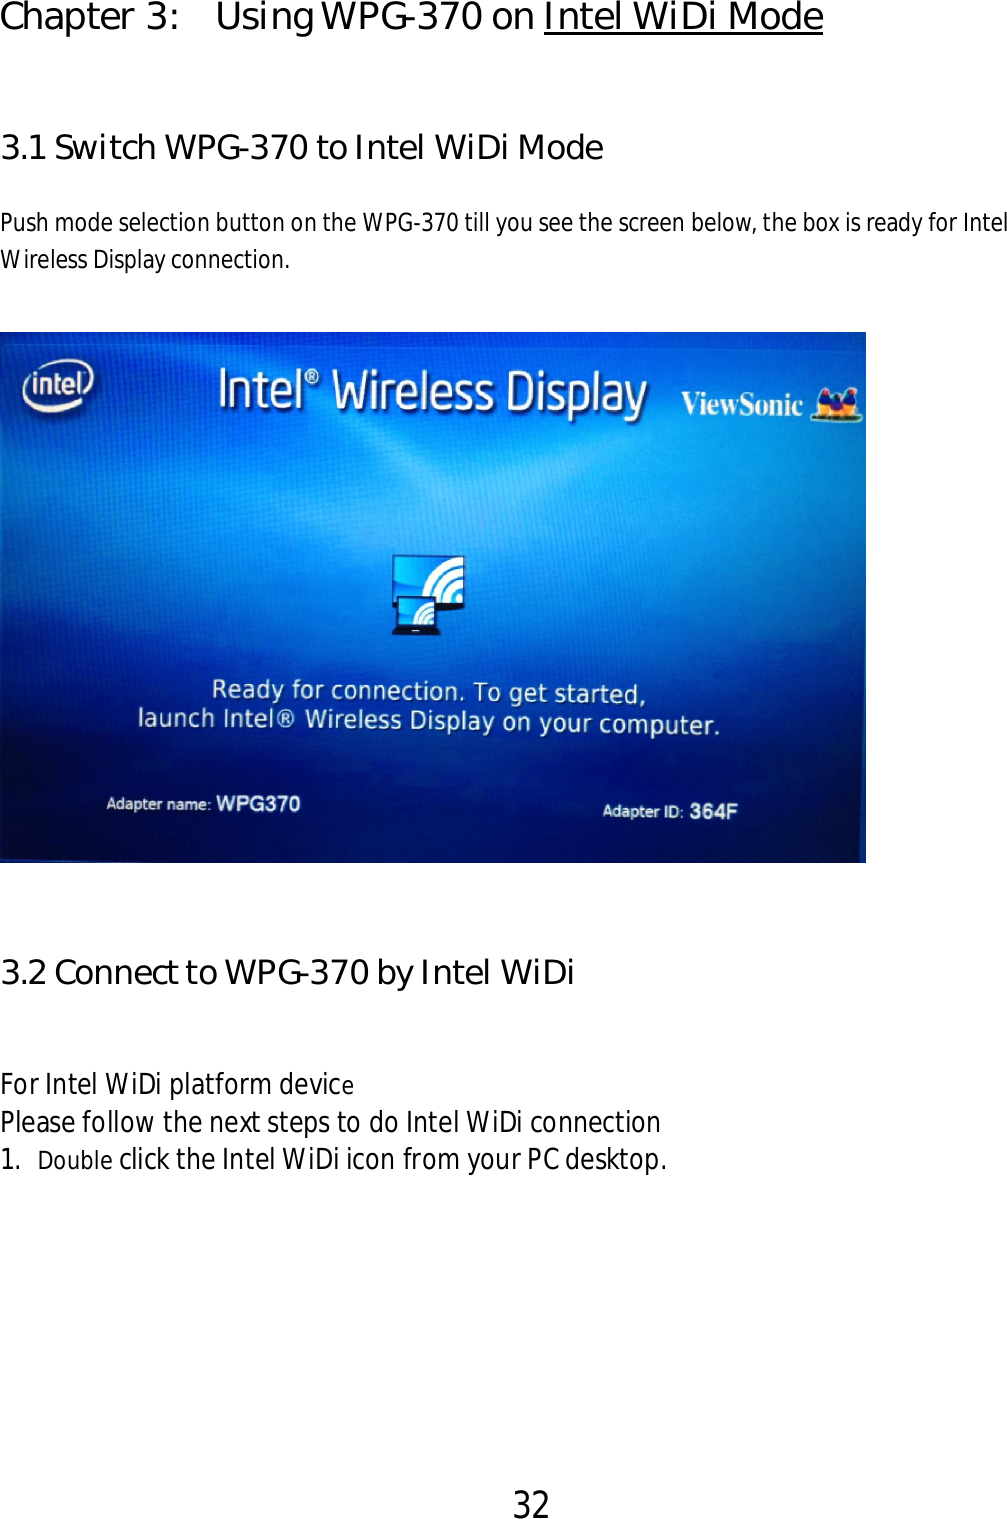 32    Chapter 3:    Using WPG-370 on Intel WiDi Mode   3.1 Switch WPG-370 to Intel WiDi Mode Push mode selection button on the WPG-370 till you see the screen below, the box is ready for Intel Wireless Display connection.      3.2 Connect to WPG-370 by Intel WiDi    For Intel WiDi platform device Please follow the next steps to do Intel WiDi connection 1. Double click the Intel WiDi icon from your PC desktop. 